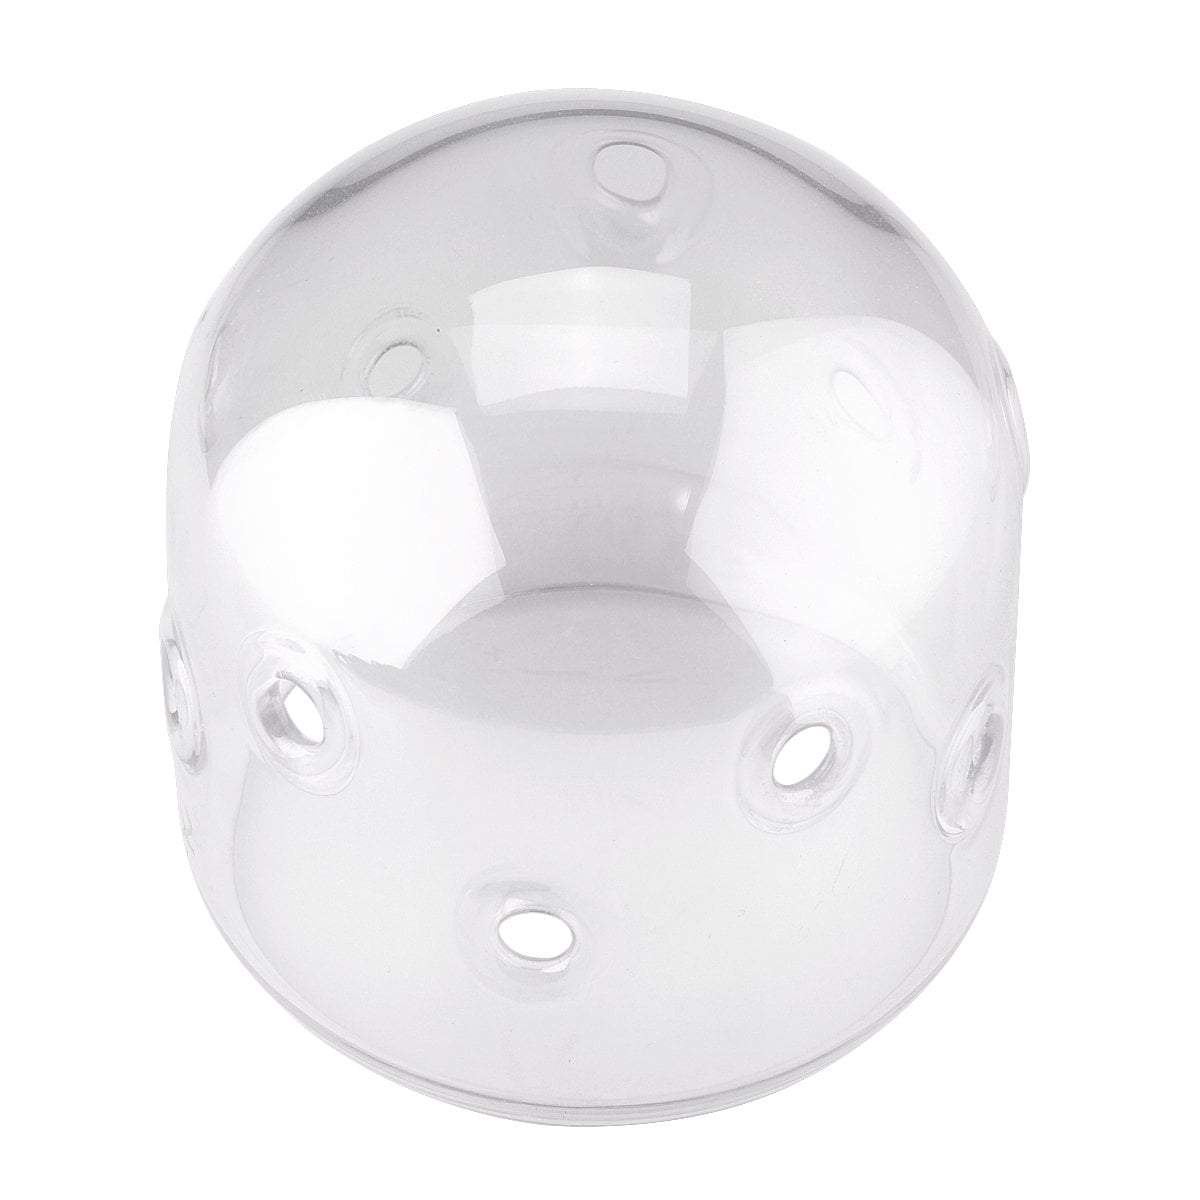 Godox AD1200Pro Glass Dome Cover for Flash Tube